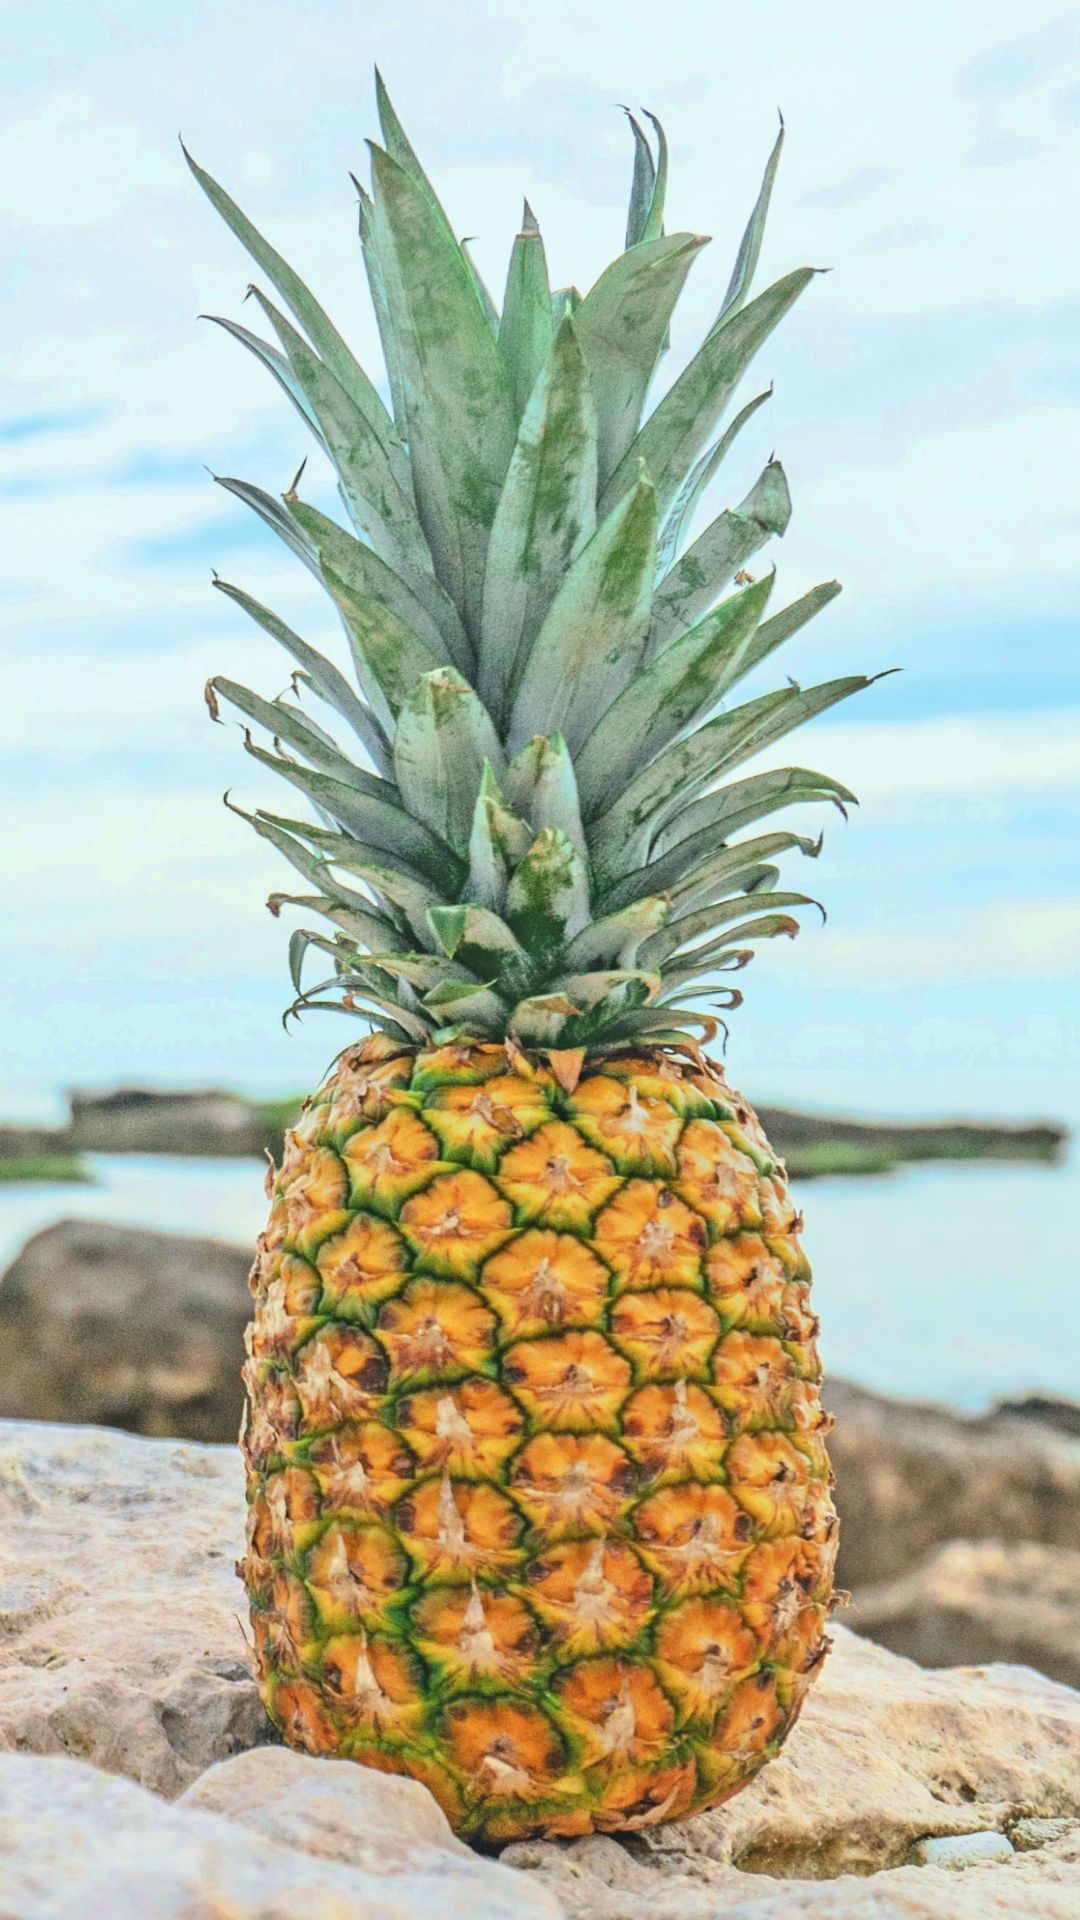 Pineapple: The only known carriers of bromelain, an enzyme that breaks down protein. 1080x1920 Full HD Background.